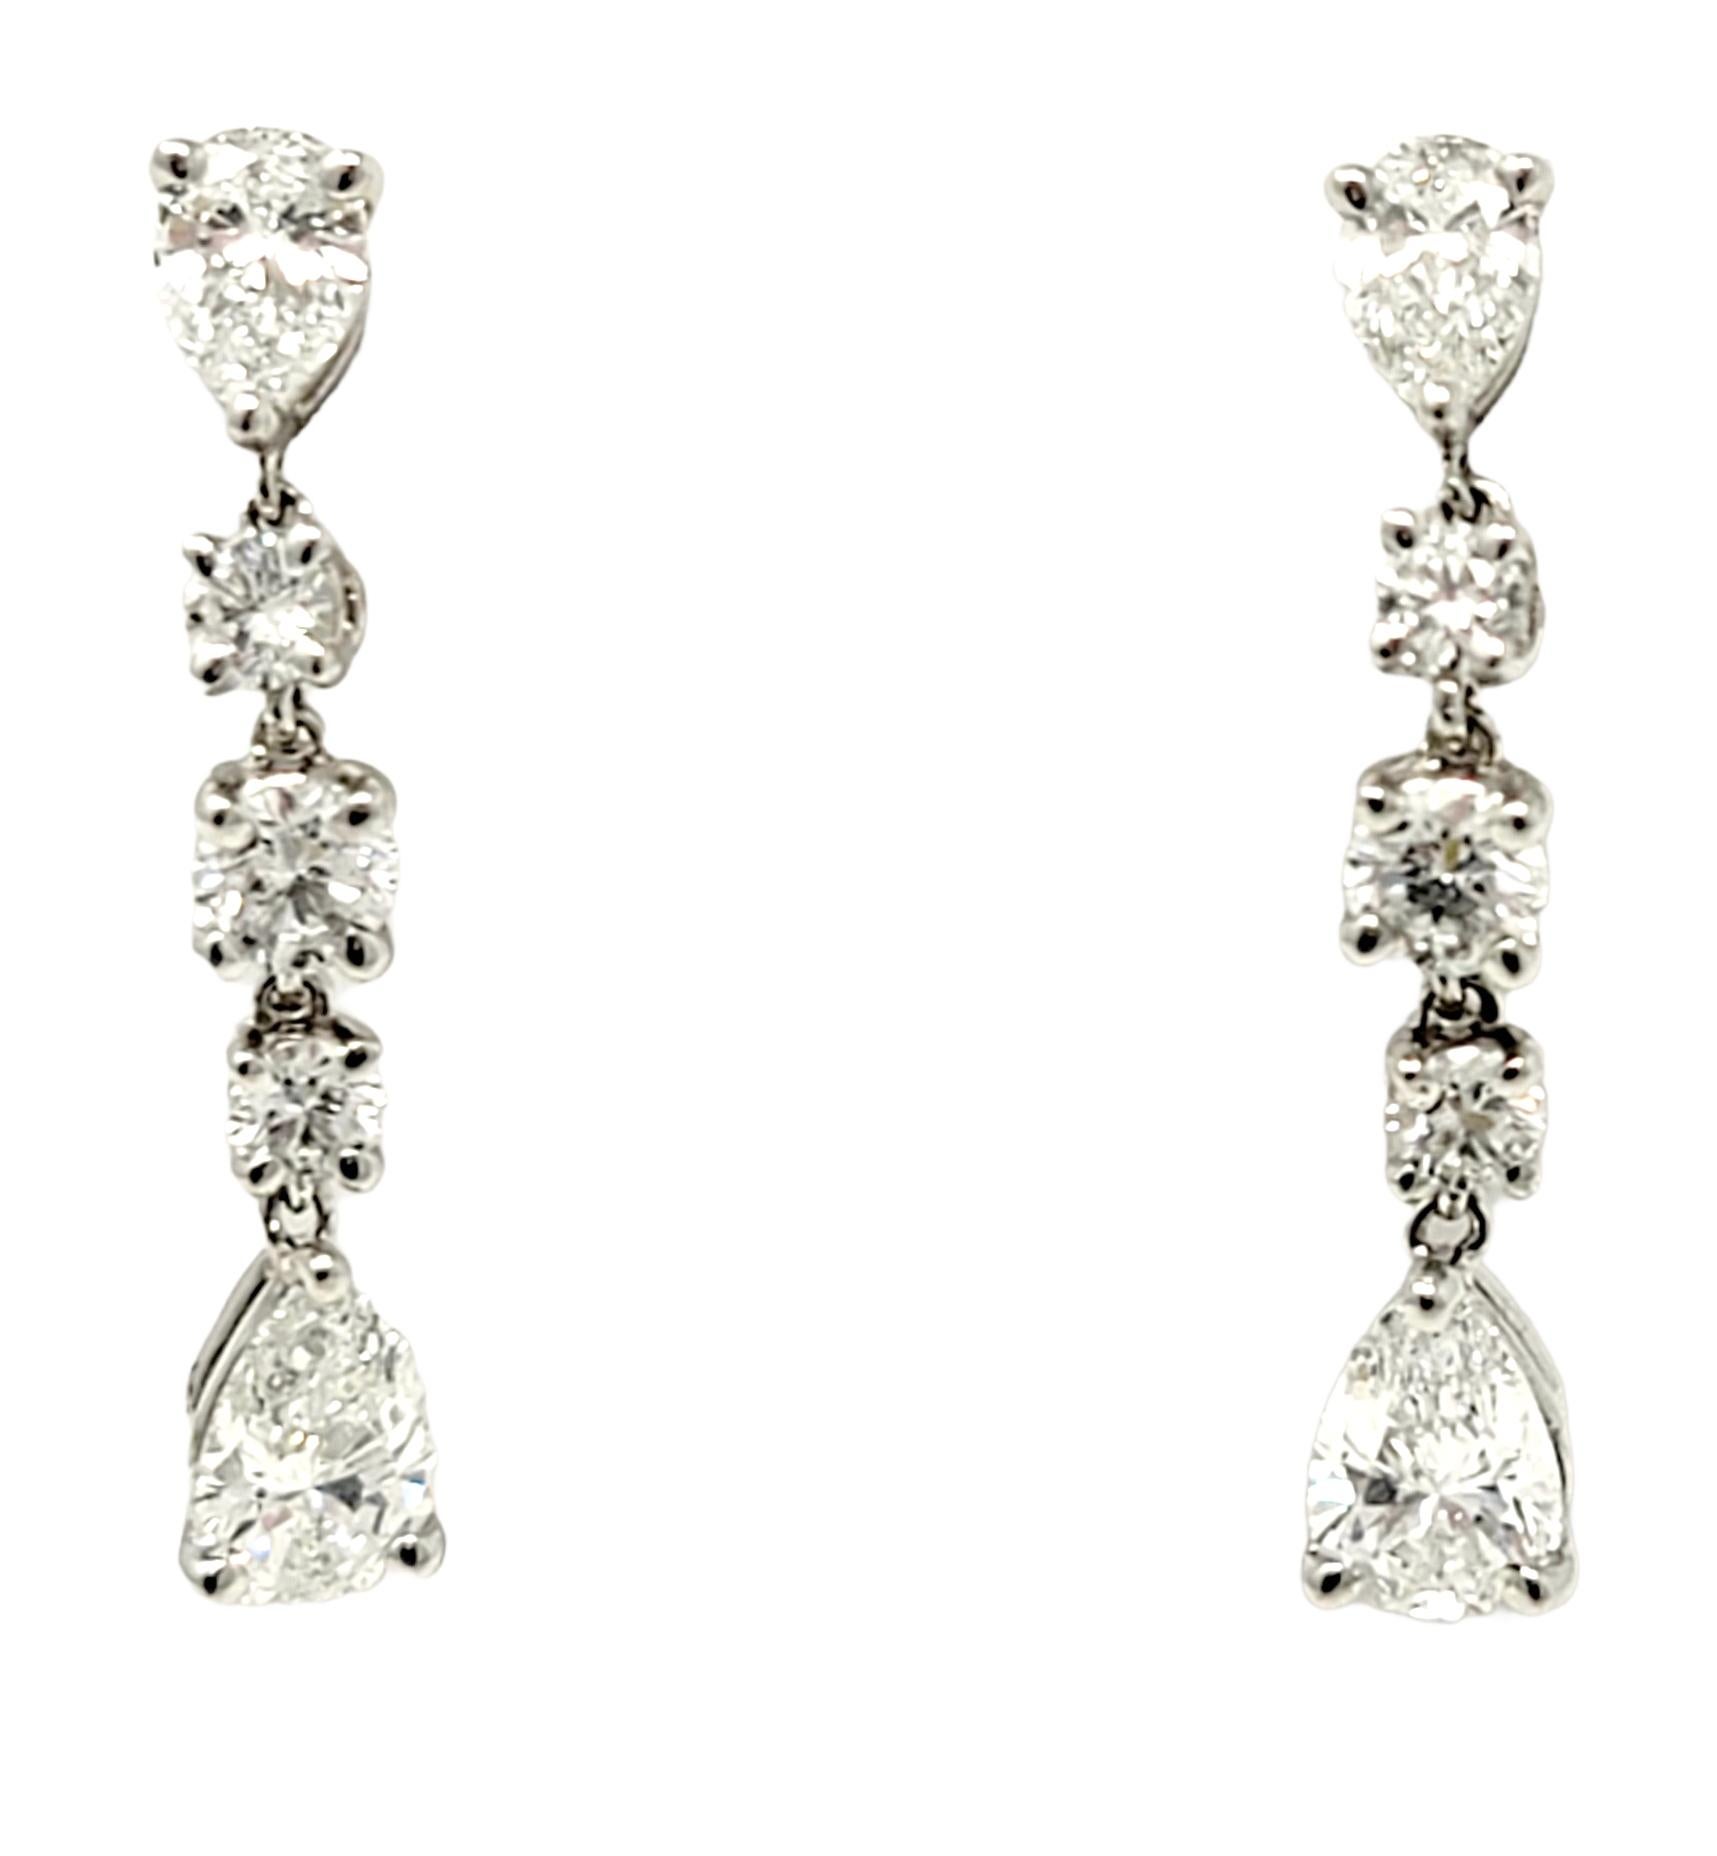 These gorgeous Tiffany & Co. diamond dangle earrings offer major sparkle and a timeless design. The gentle movement and length reflects the diamonds from all angles, making them twinkle beautifully on the ear. These designer beauties feature a total